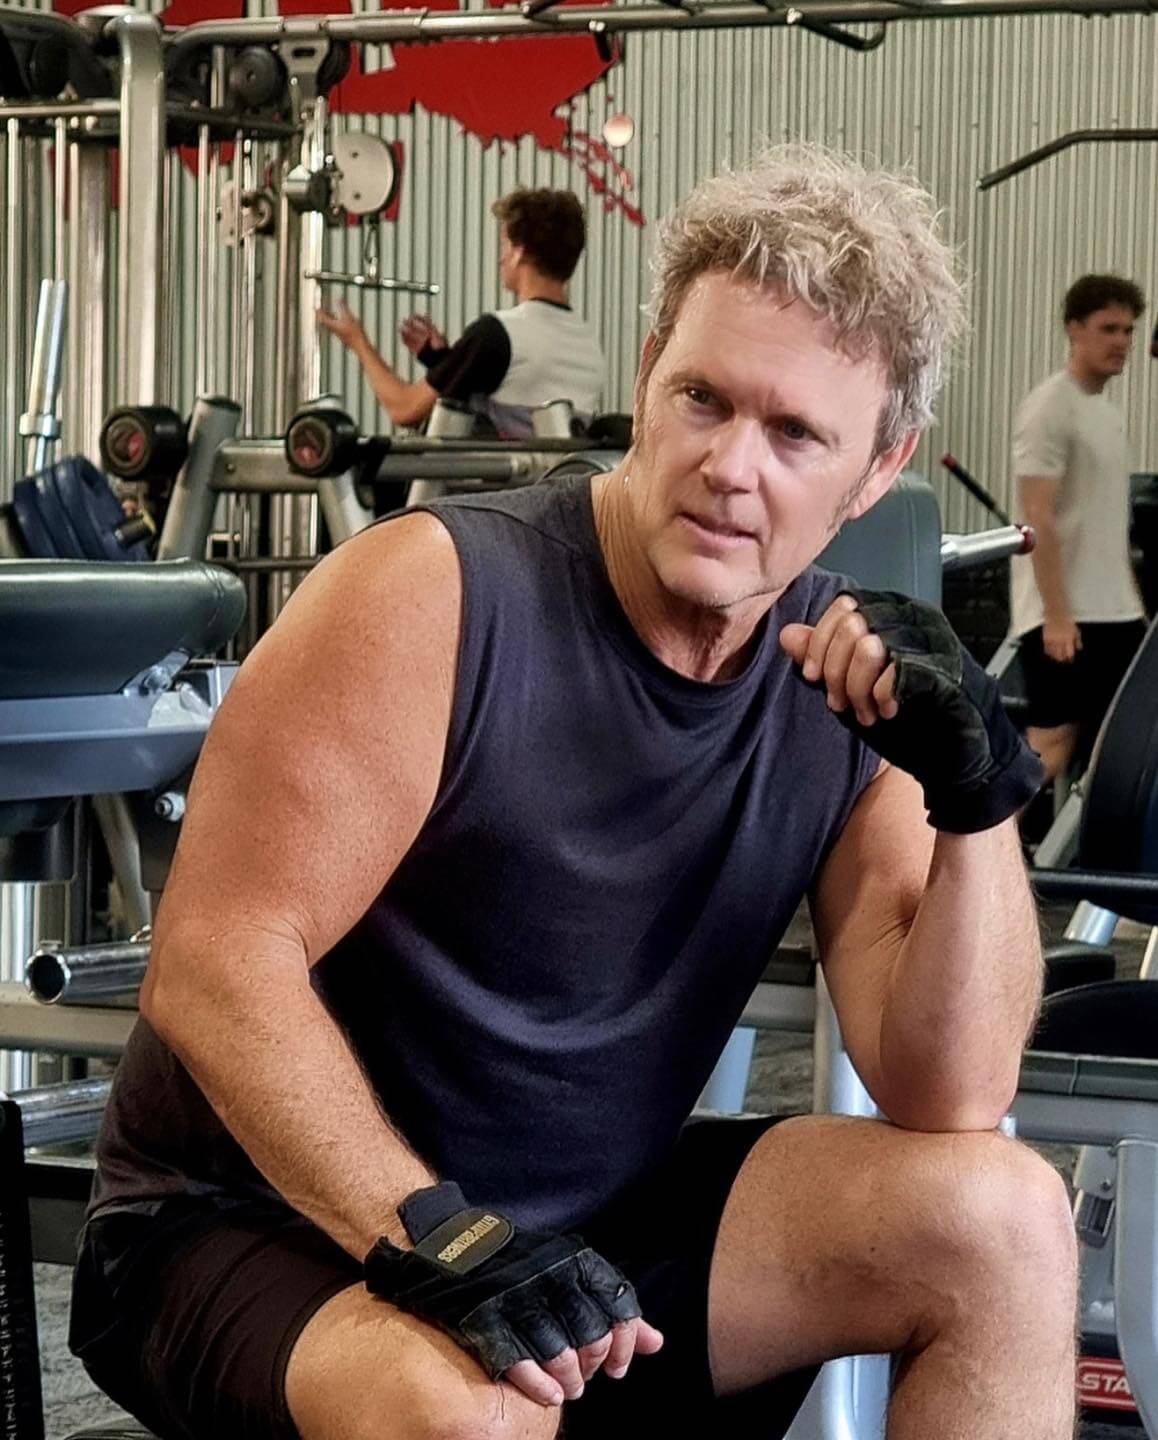 Craig Mclachlan working out in the gym.